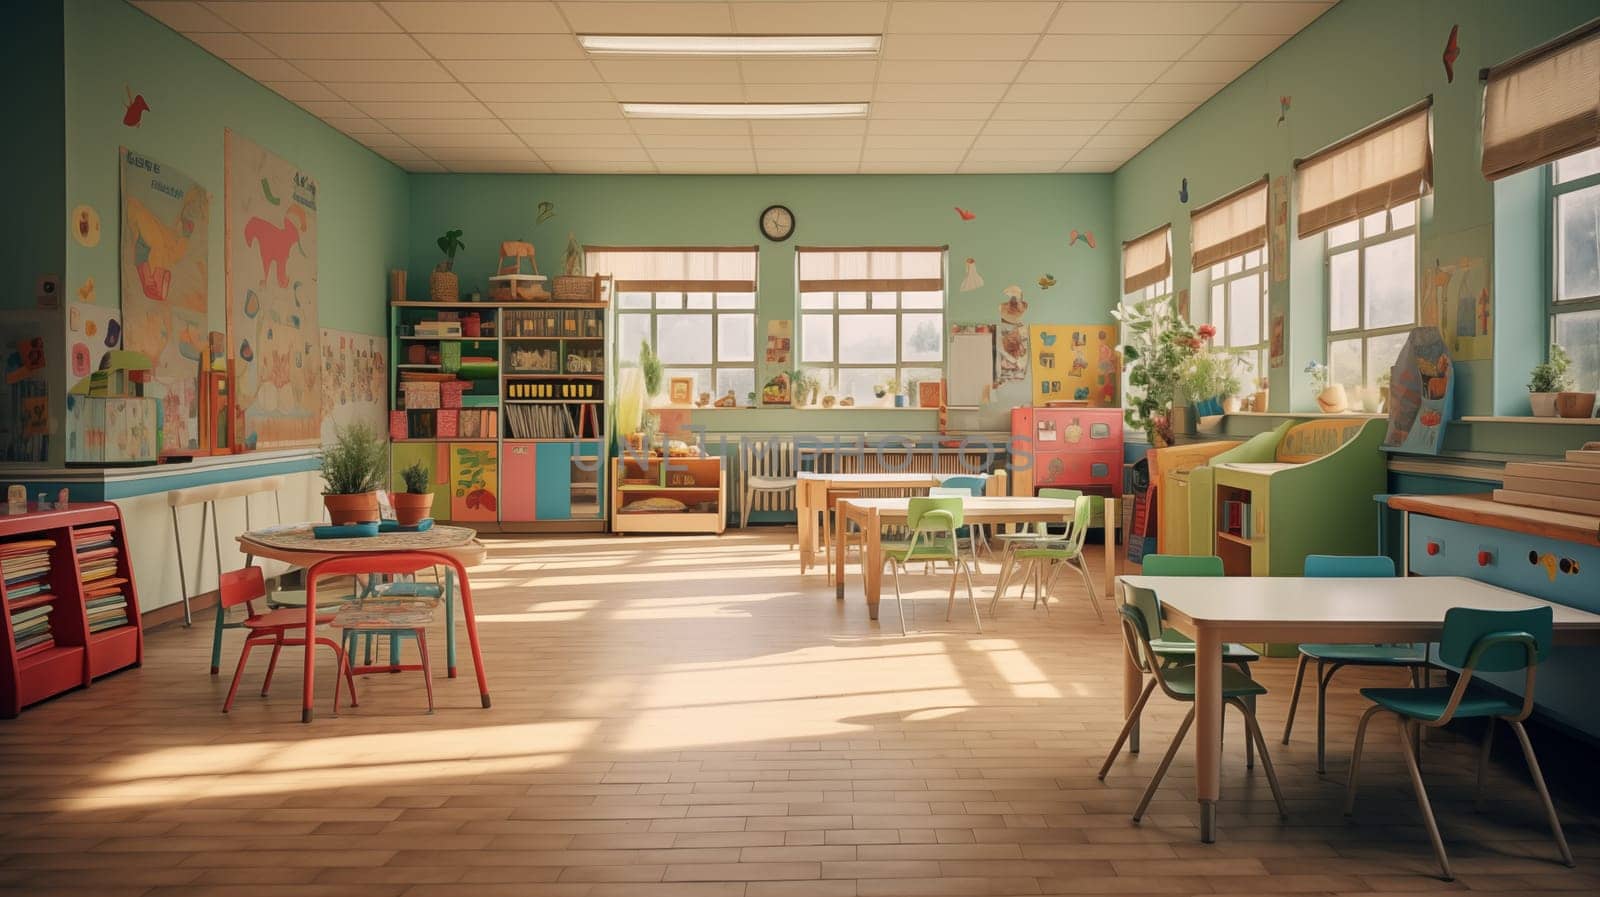 Vibrant and colorful preschool classroom with artwork and educational materials.